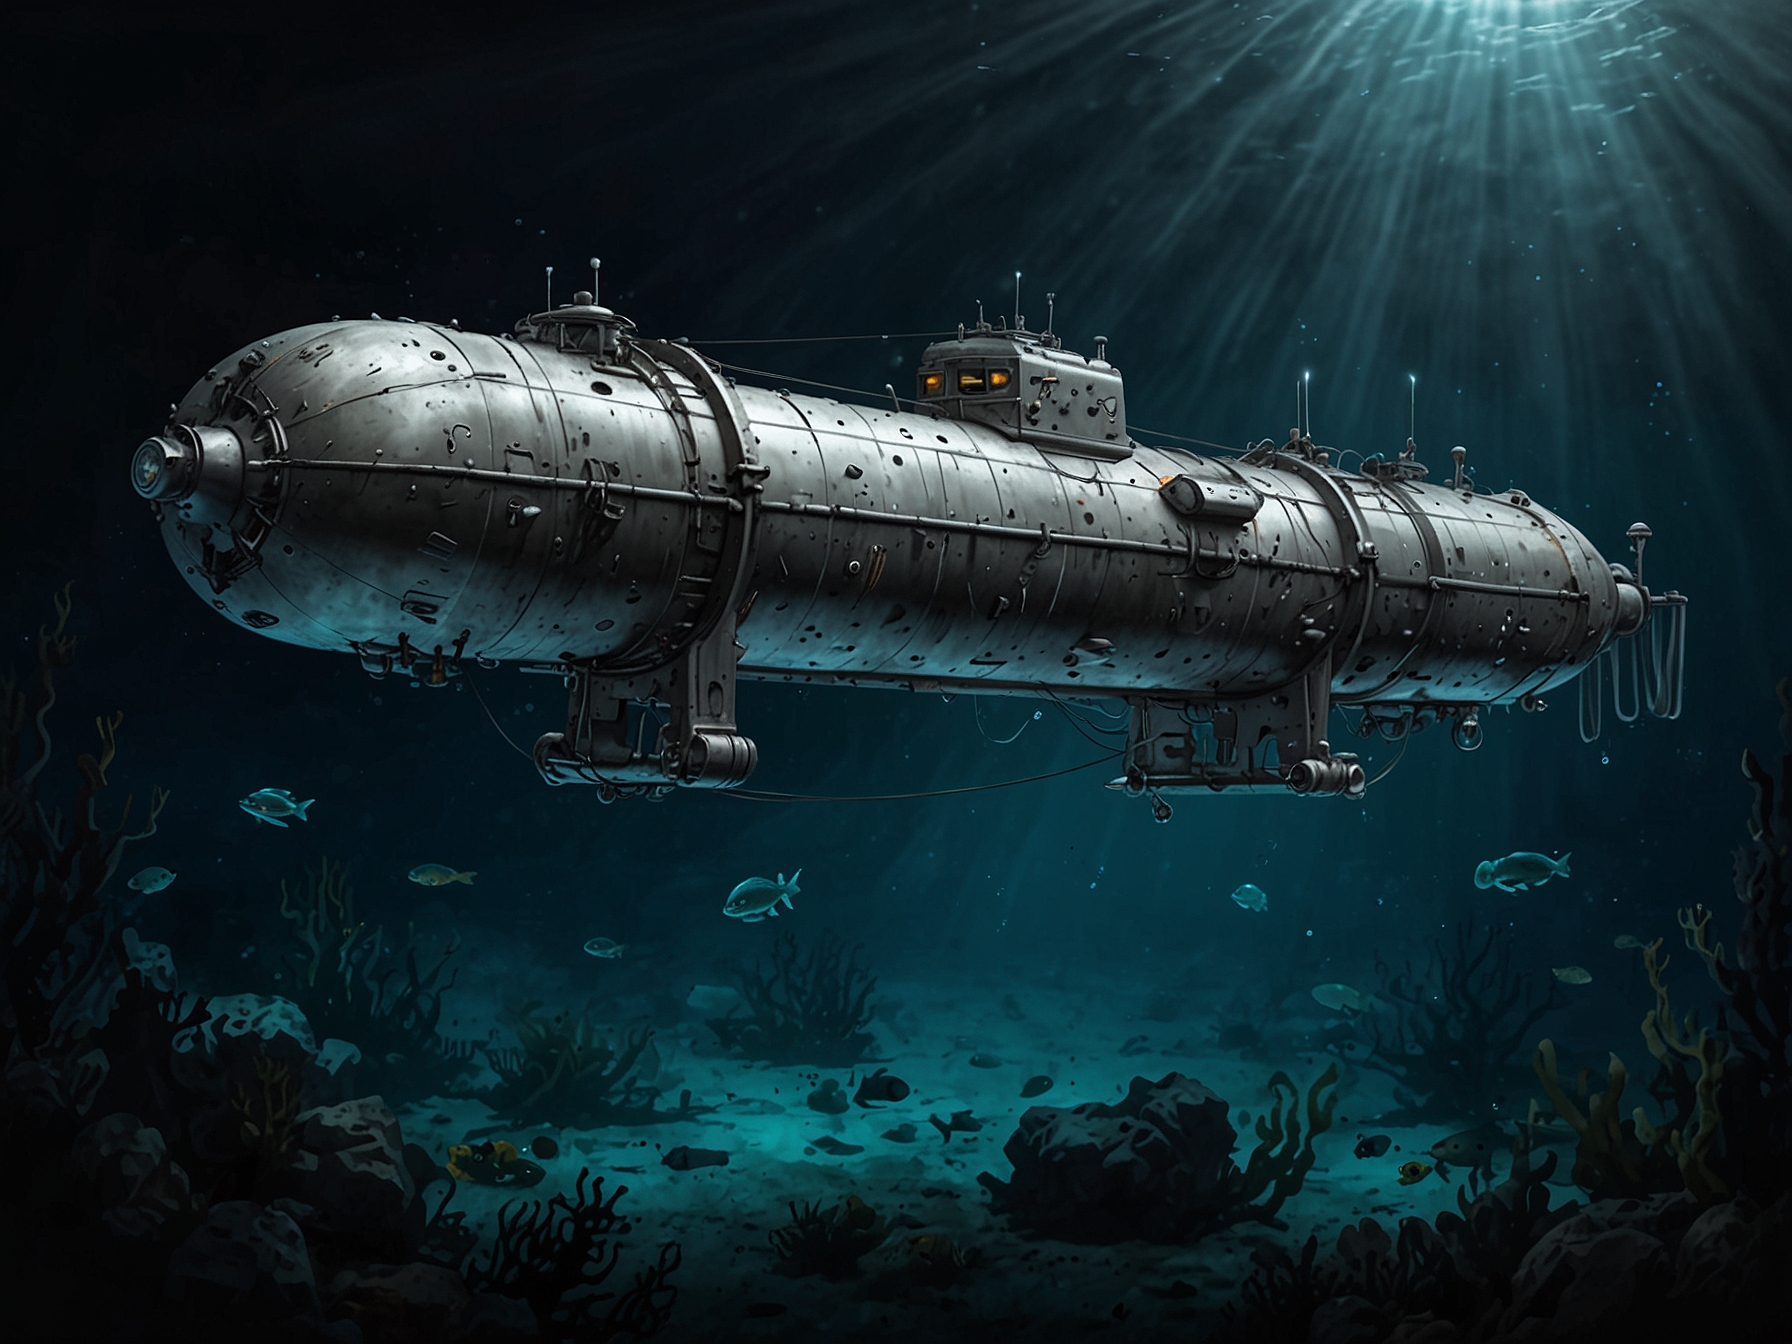 A depiction of modern AUVs and ROVs navigating the ocean floor, showcasing the technological advancements enhancing the safety and productivity of deep-sea exploration.